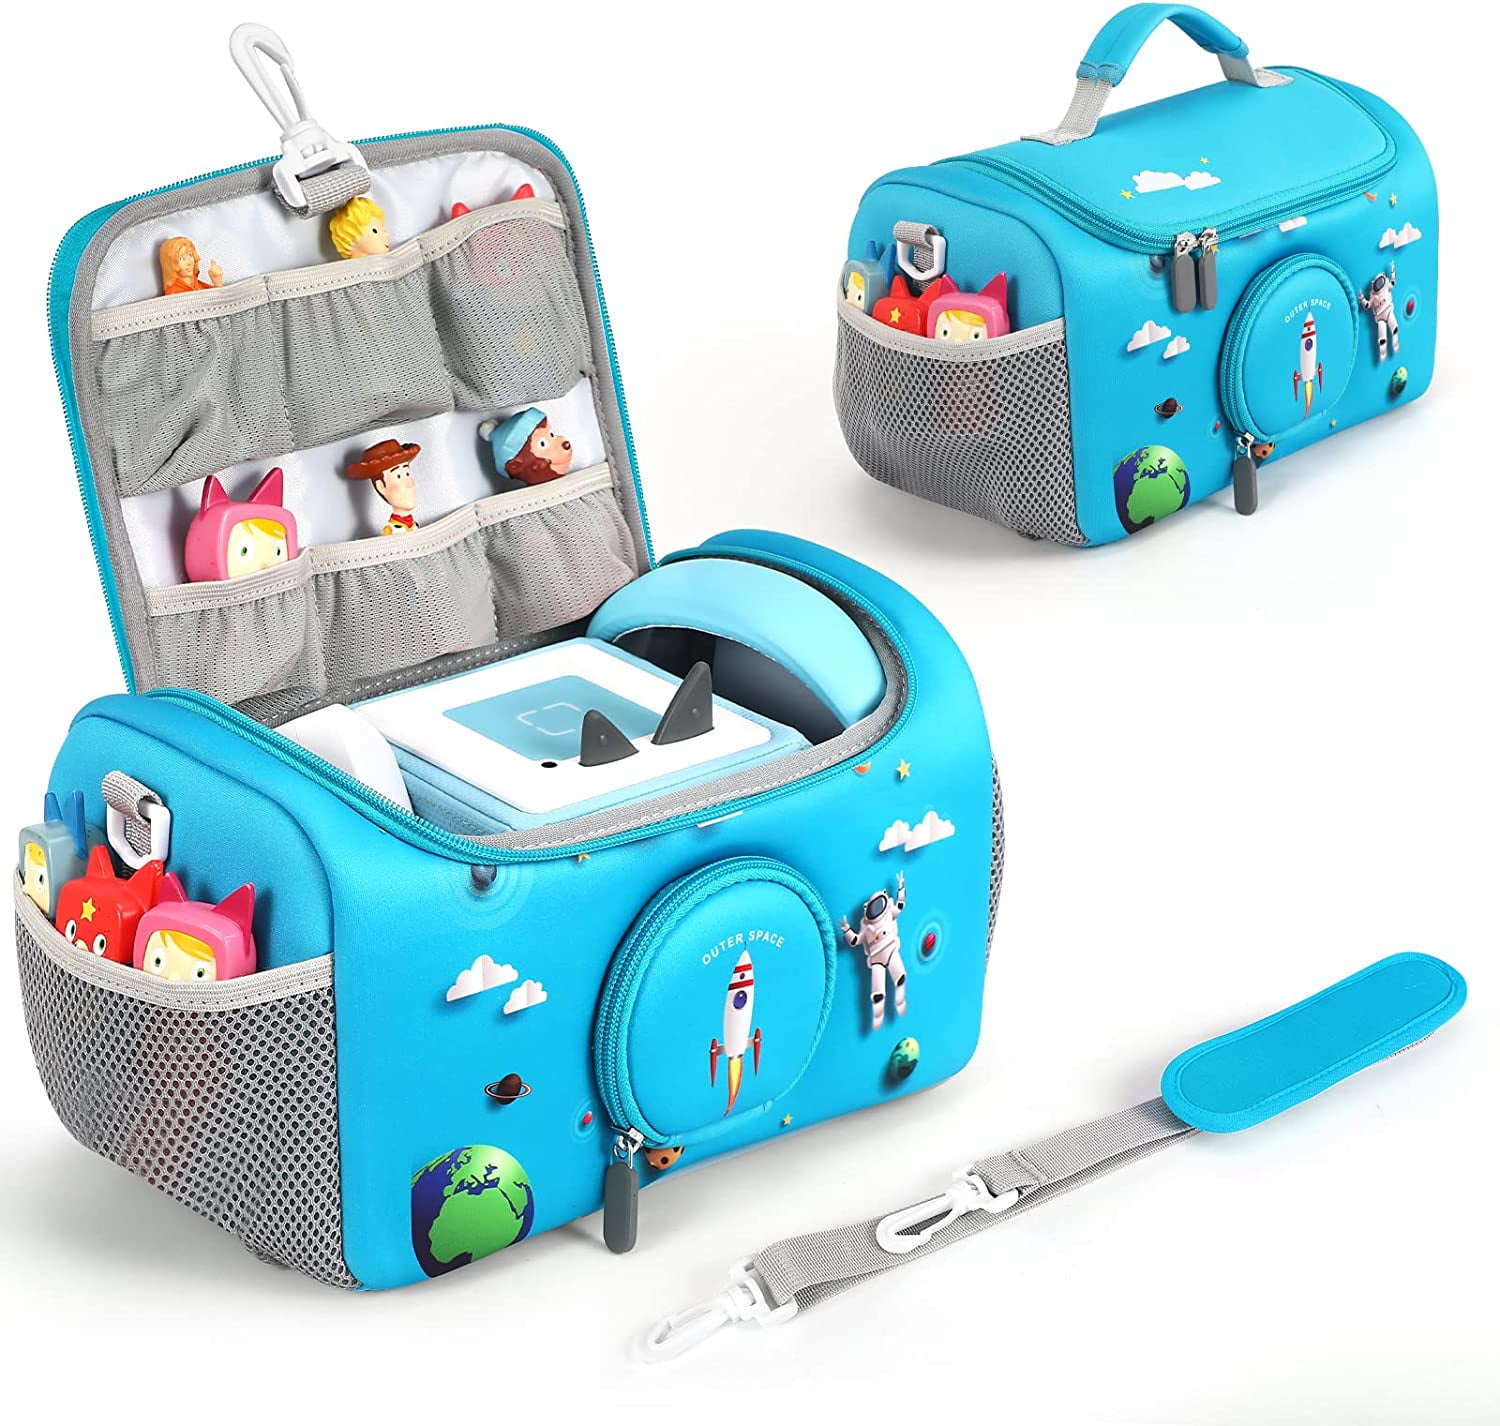 Figures Storage Bag Storage Carrying Case For Toniebox Educational